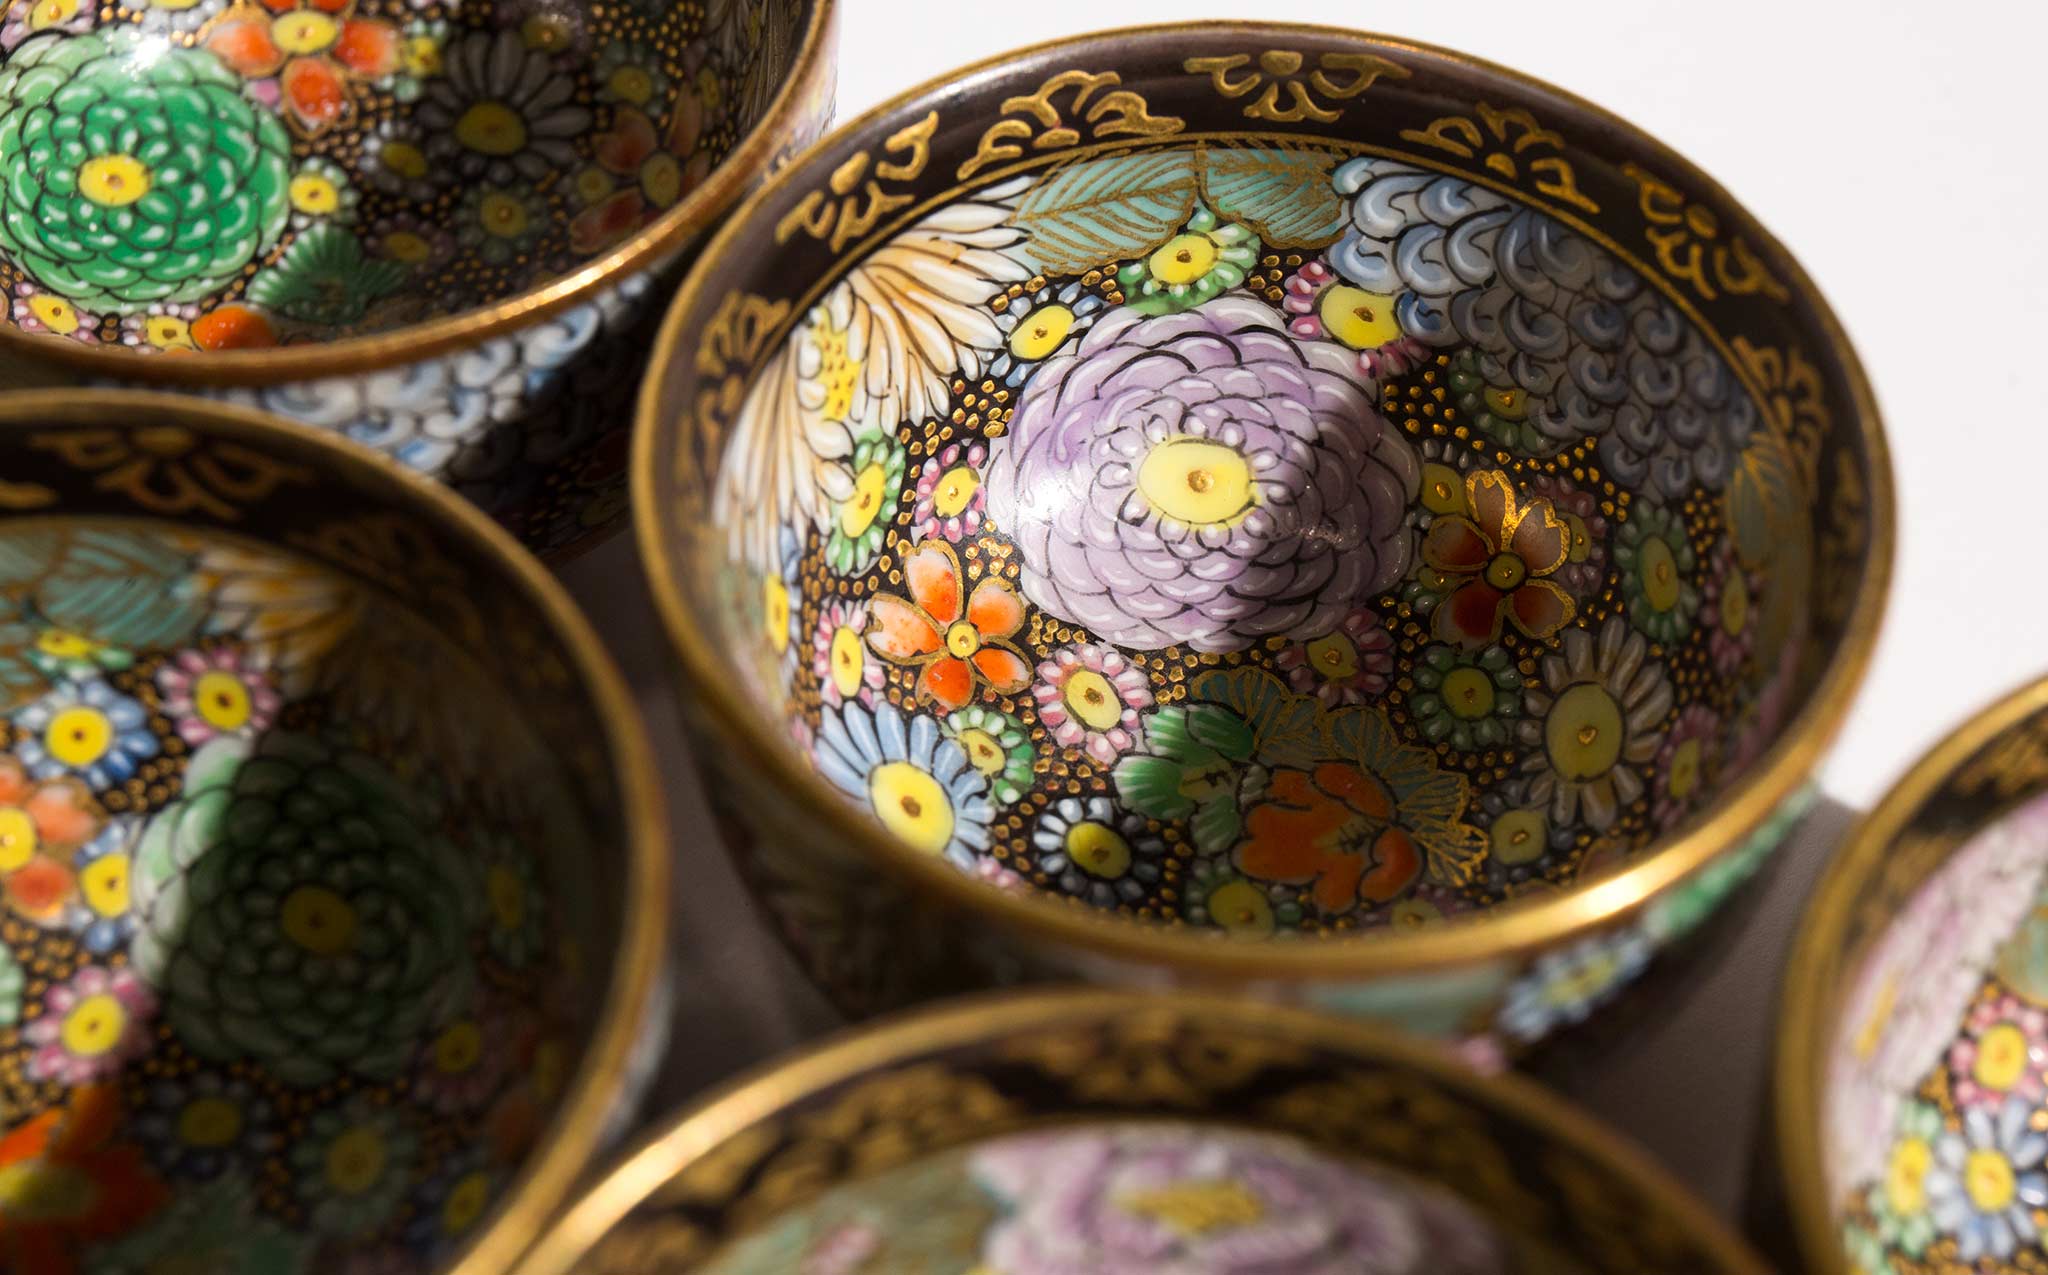 Hand Painted Japanese Floral Sake Cups